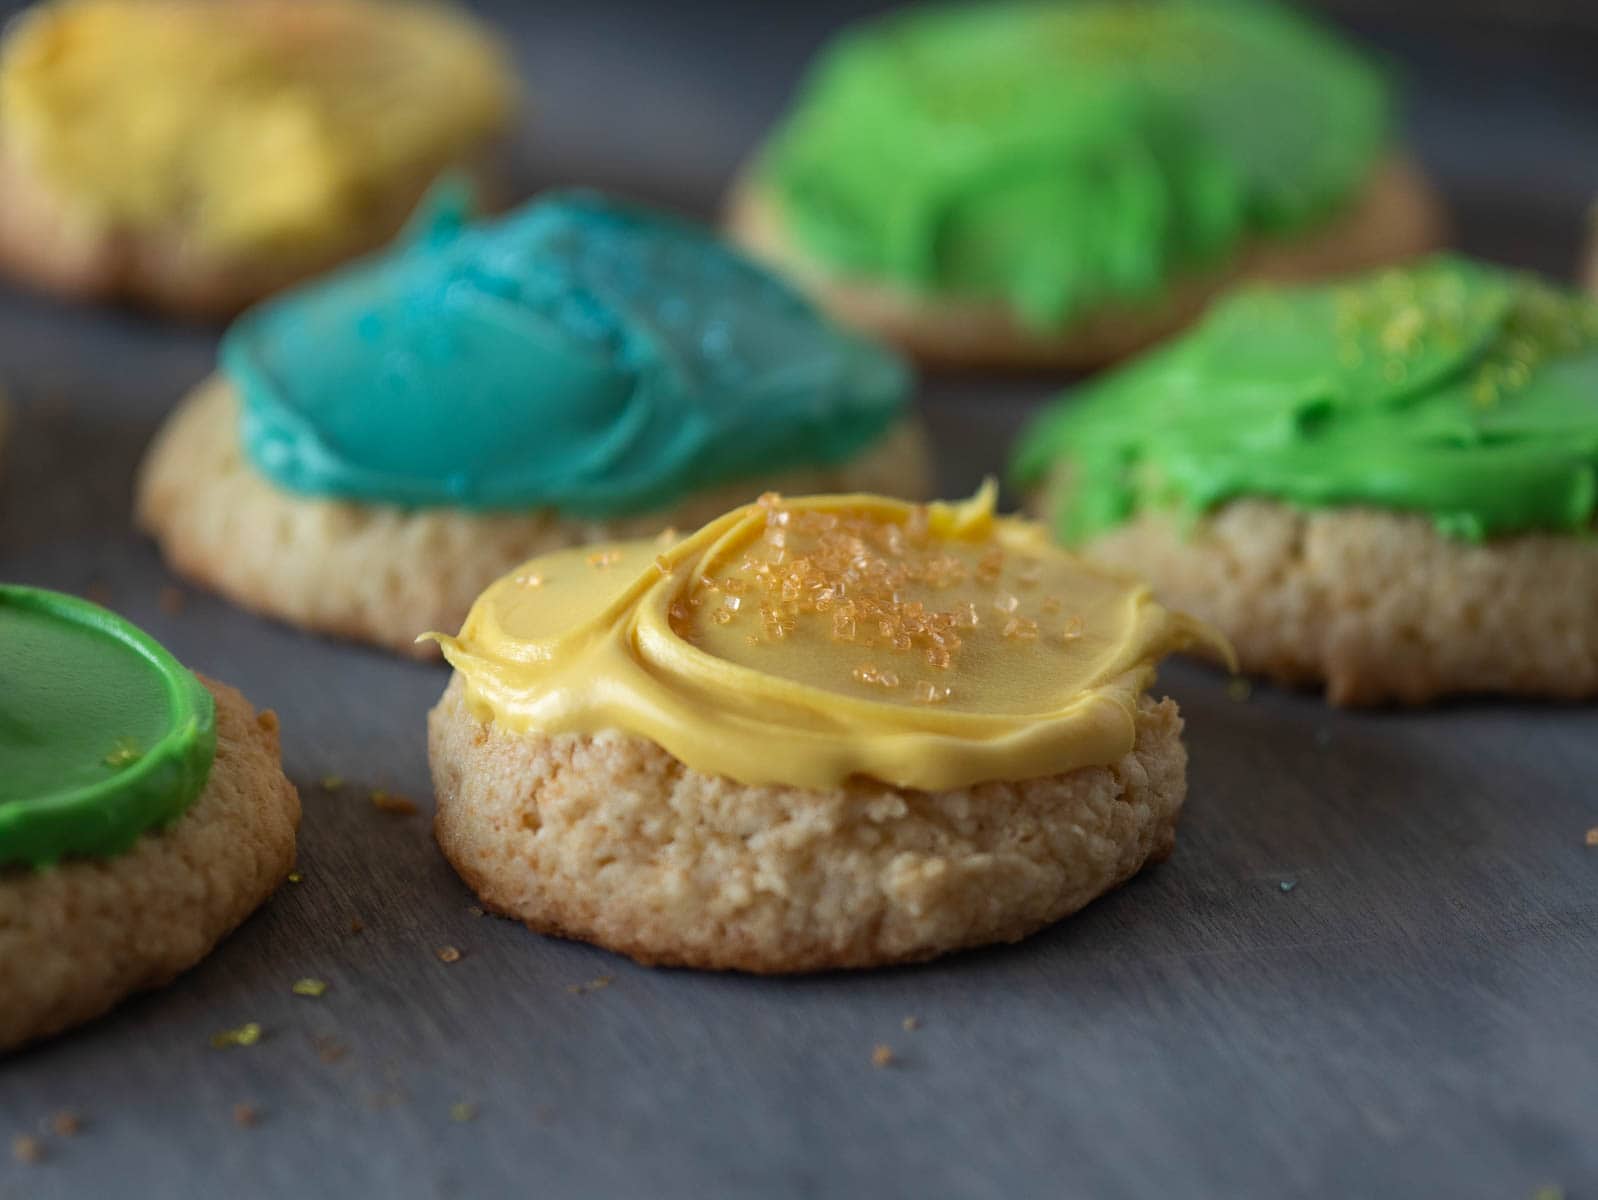 Sour cream cookies with blue, green and yellow icing.